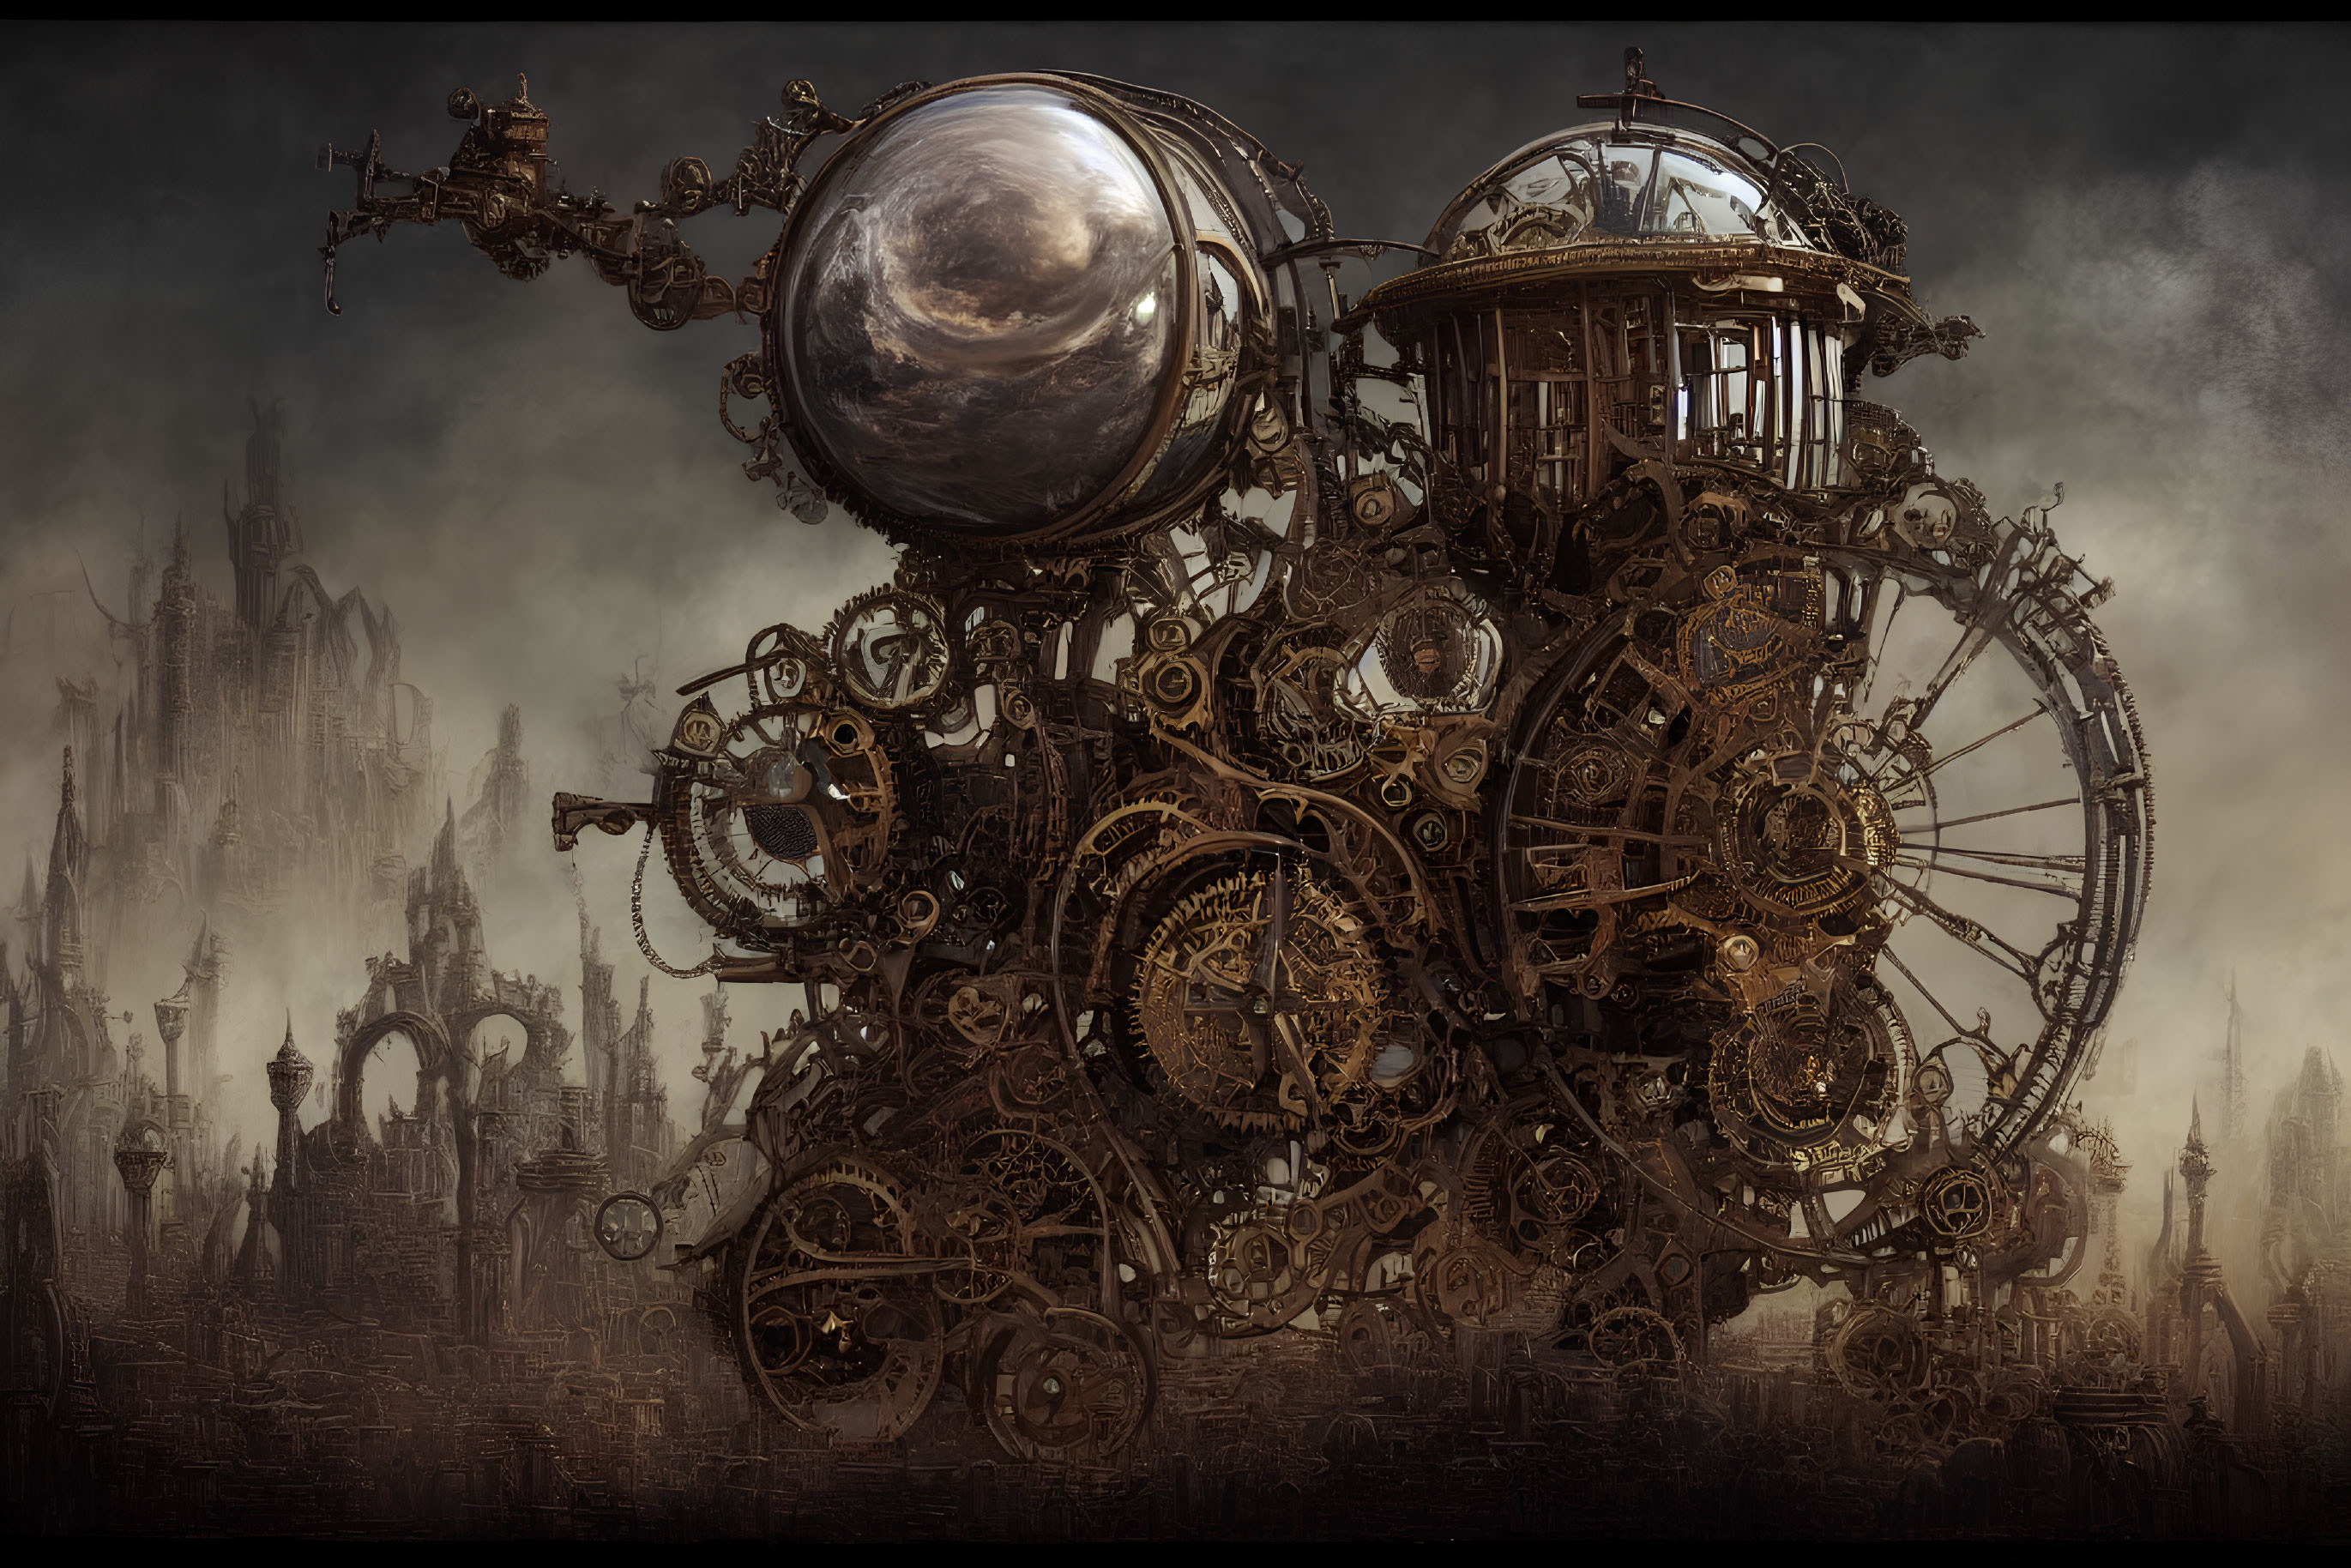 Detailed Steampunk Machinery with Ornate Gears and Spherical Elements